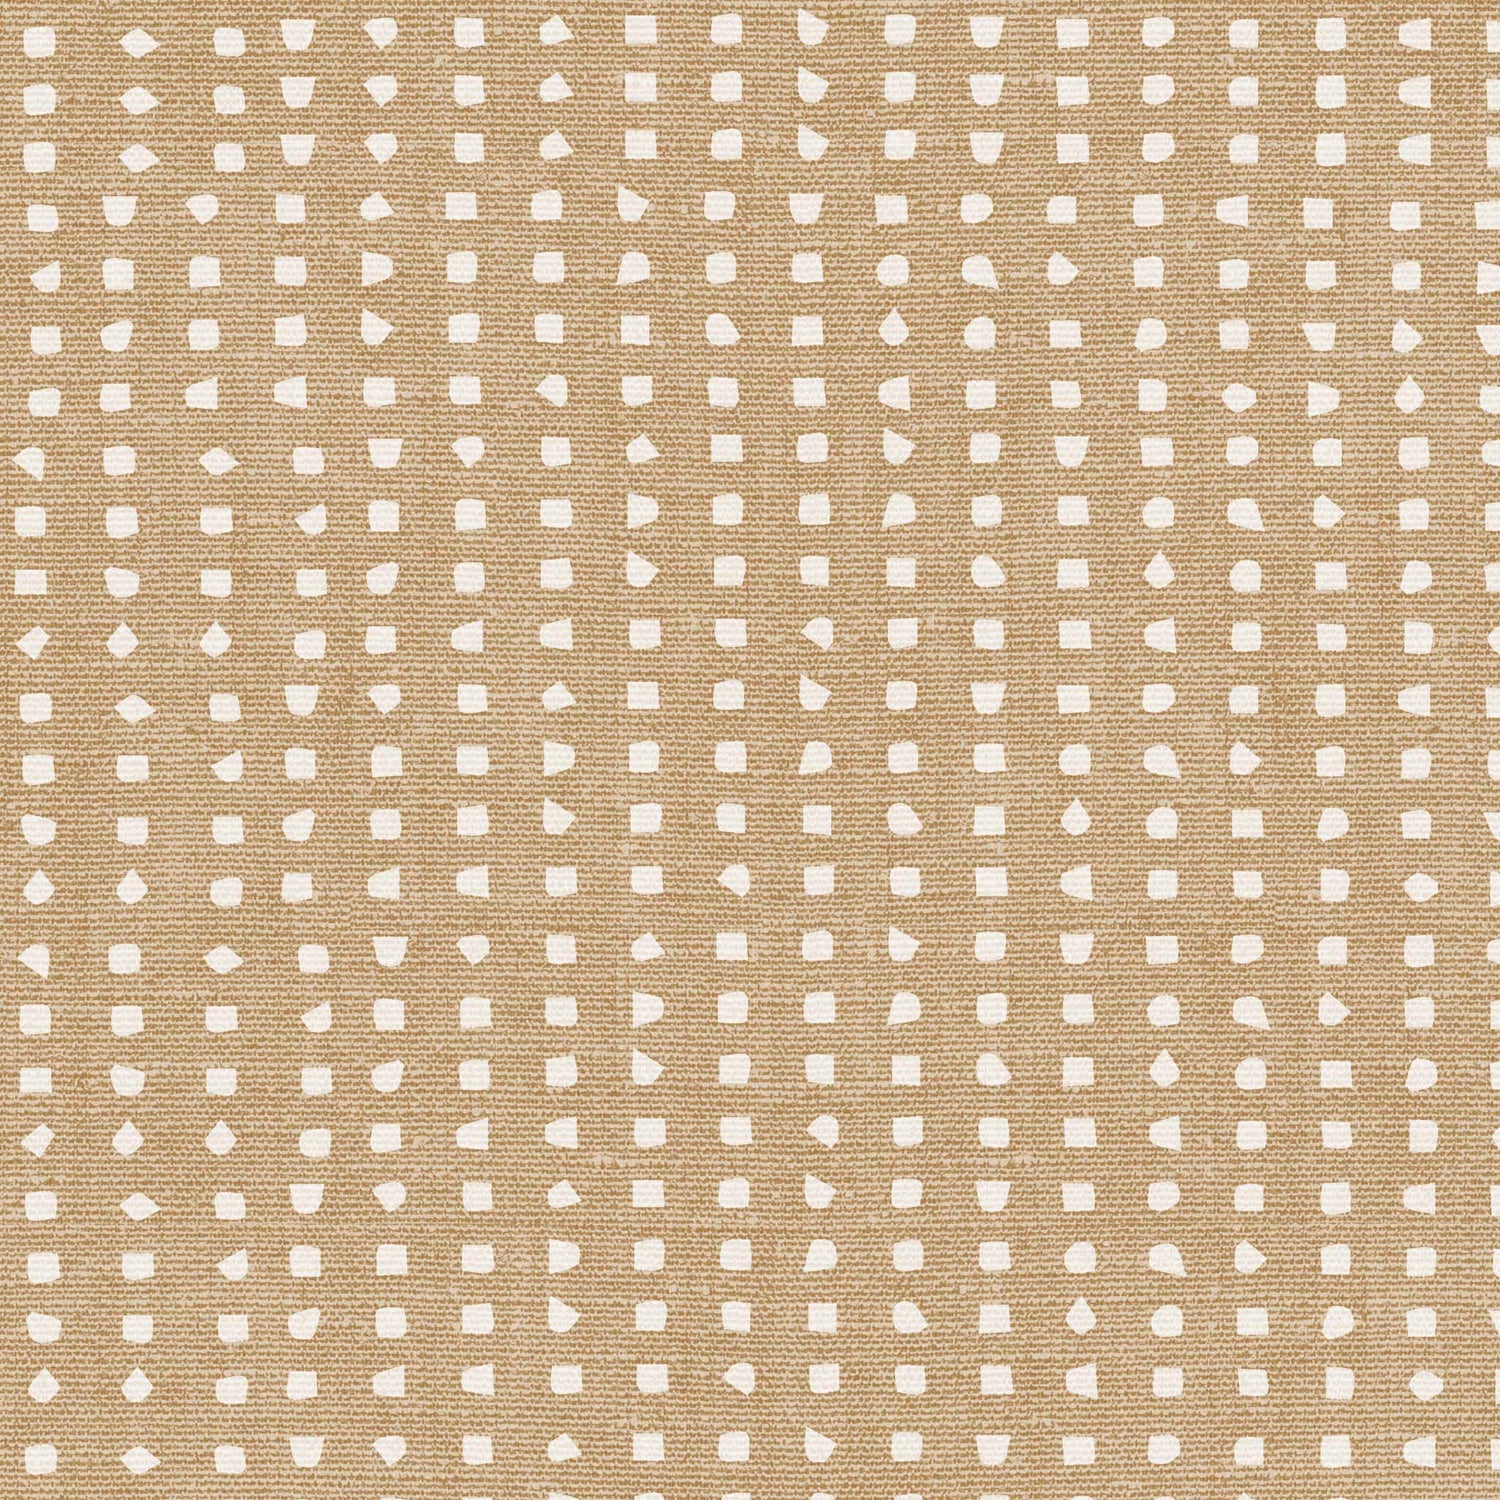 Inspire a creative atmosphere with our Geometric Dots Wallpaper in beige. Its abstract pattern of dots will bring any room to life, allowing you to express sophistication with a unique and artistic approach. 